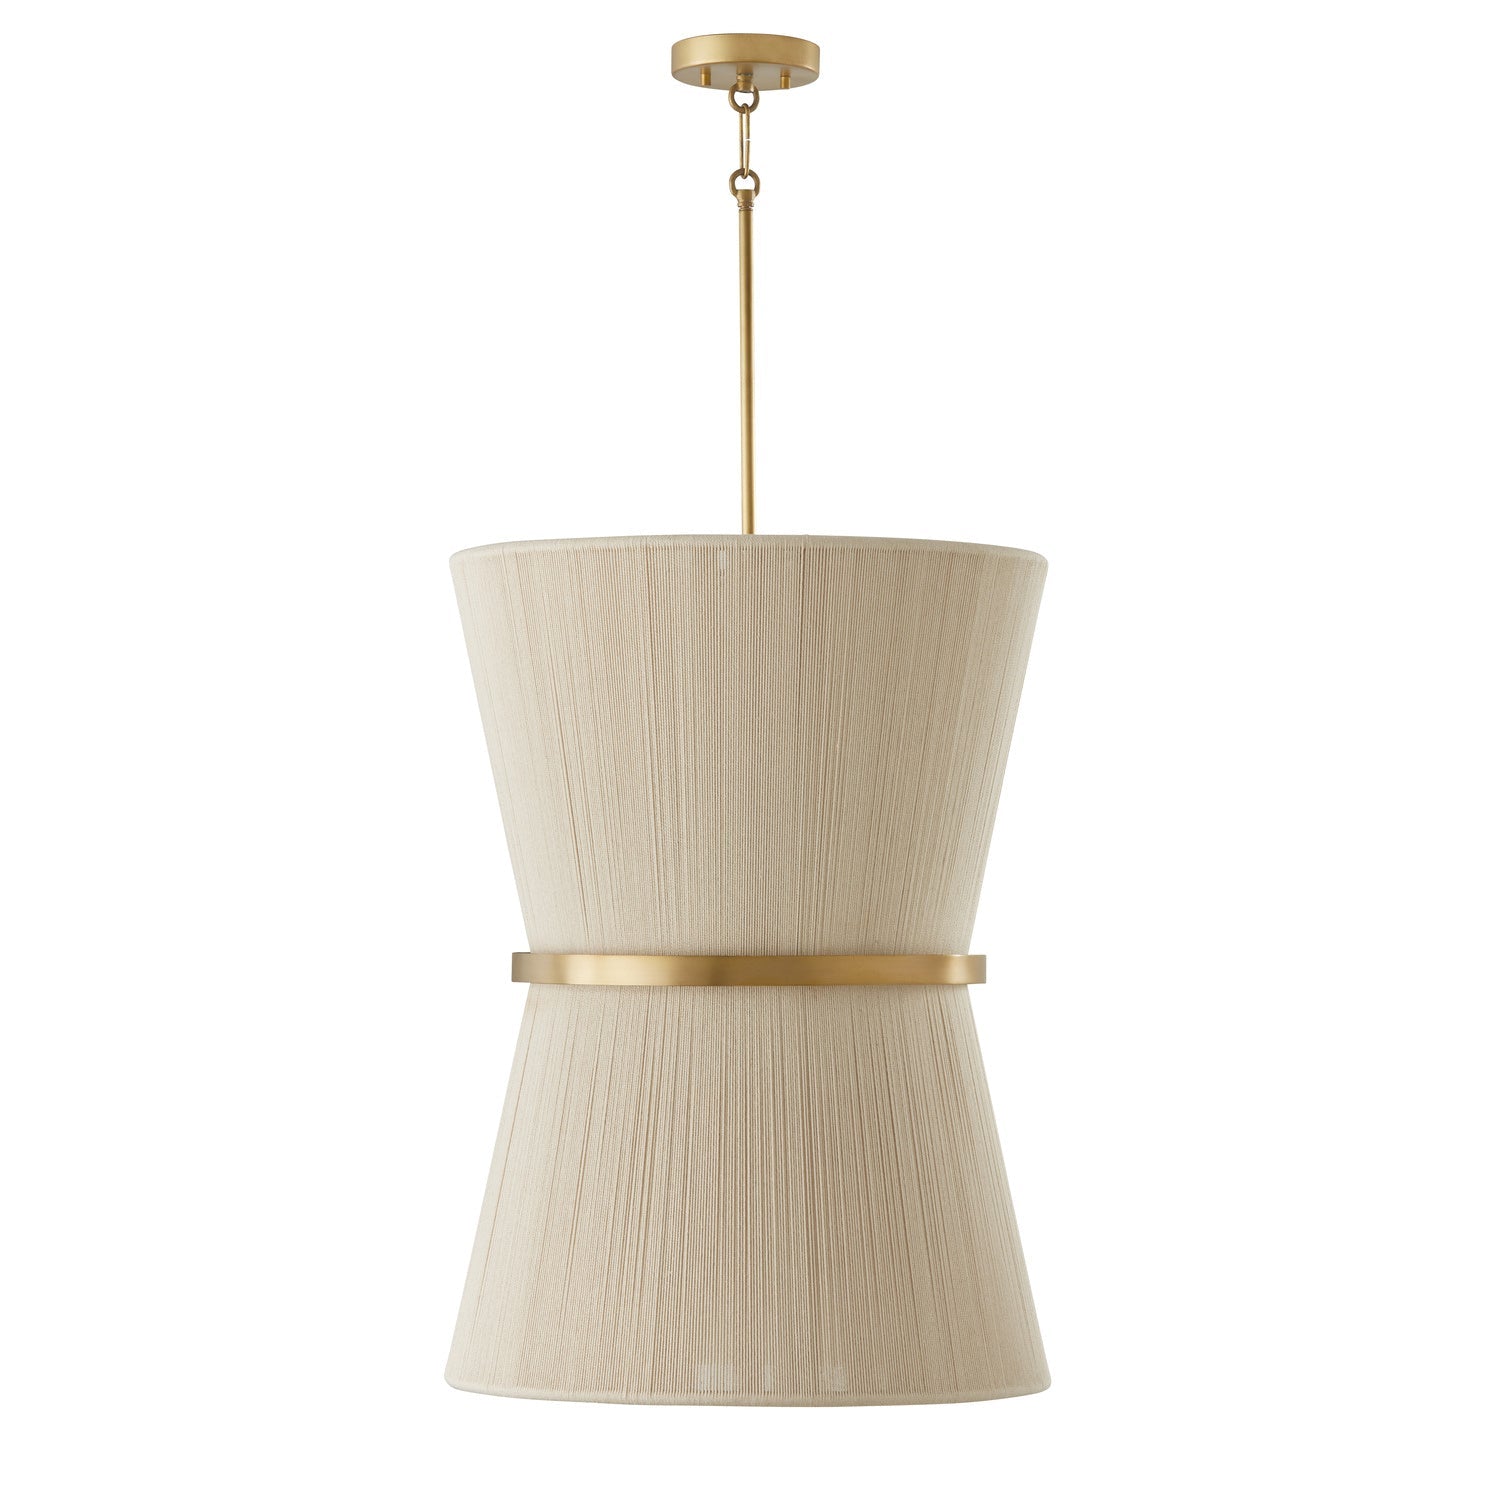 Capital Cecilia 541261NP Pendant Light - Bleached Natural Rope and Patinaed Brass